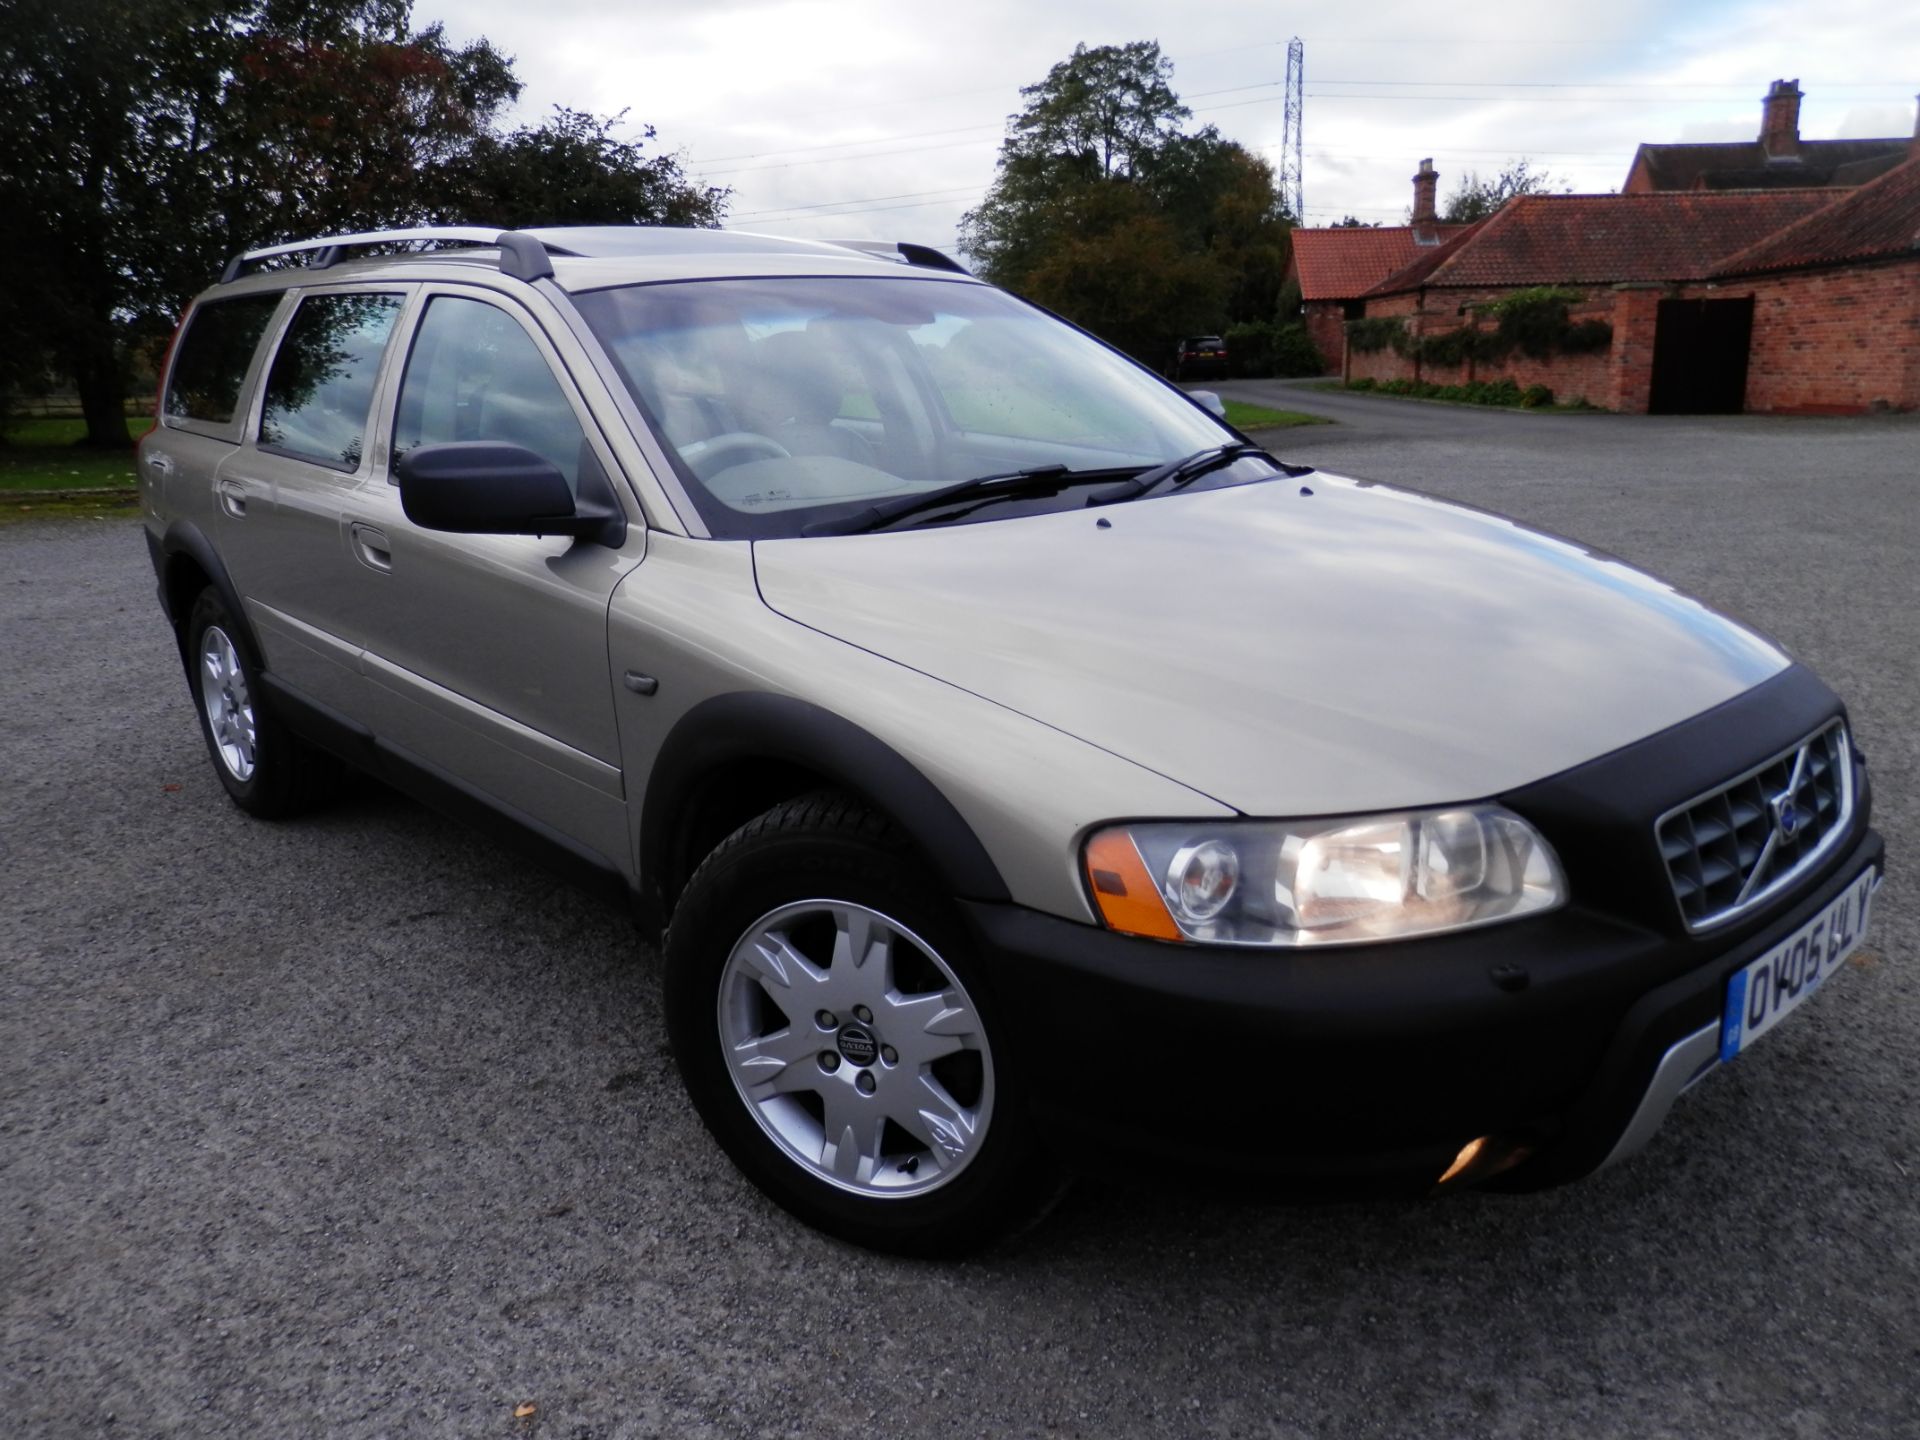 2005/05 VOLVO XC70 CROSS COUNTRY 2.4 D5 DIESEL AUTOMATIC, 4 WHEEL DRIVE, MOT MAY 2017, 150K MILES.